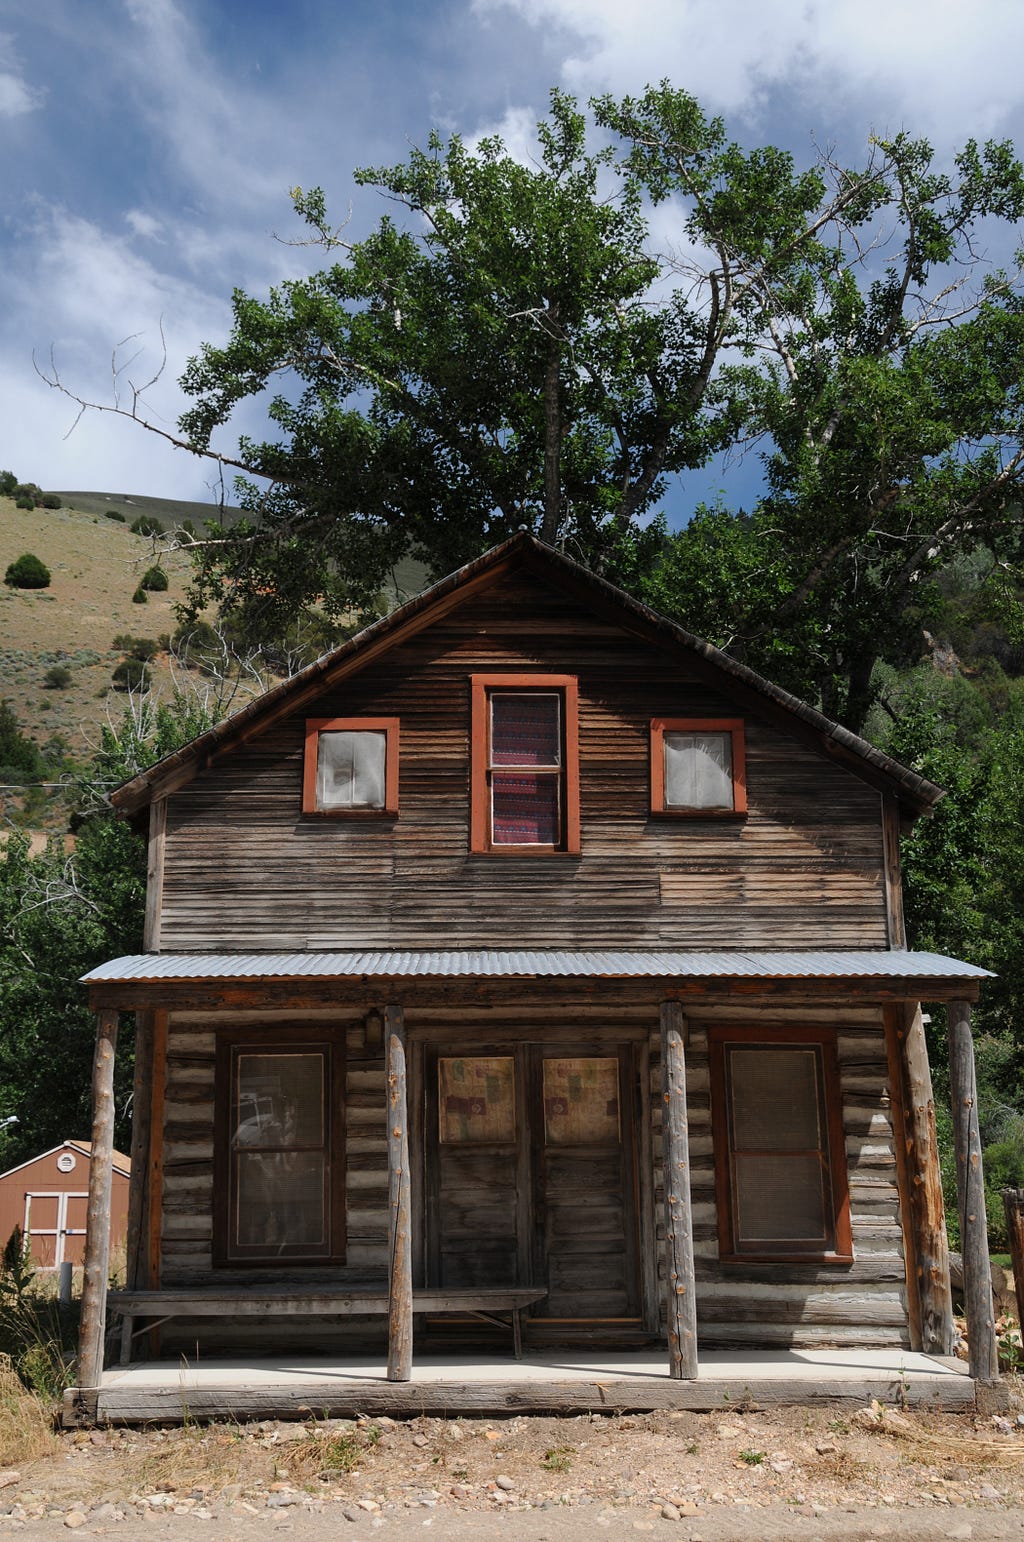 Remnants of the Old West still stand in secluded Jarbidge, Nev.